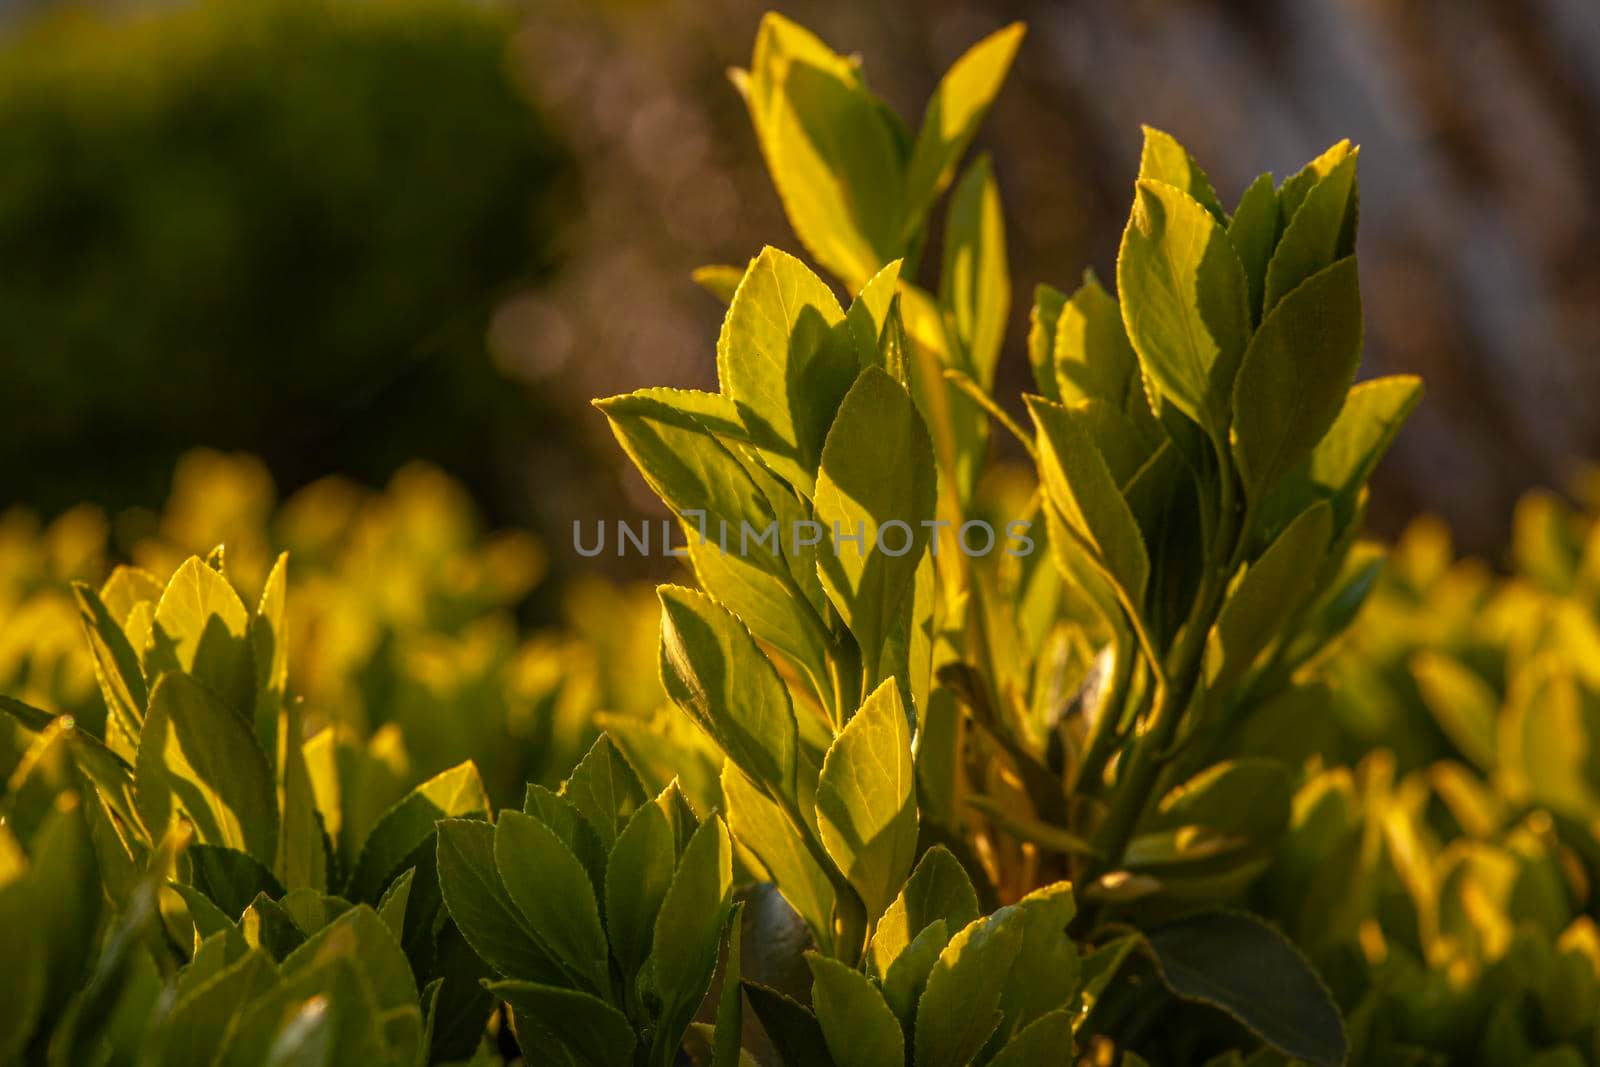 Green leaves foliage at sunset by pippocarlot